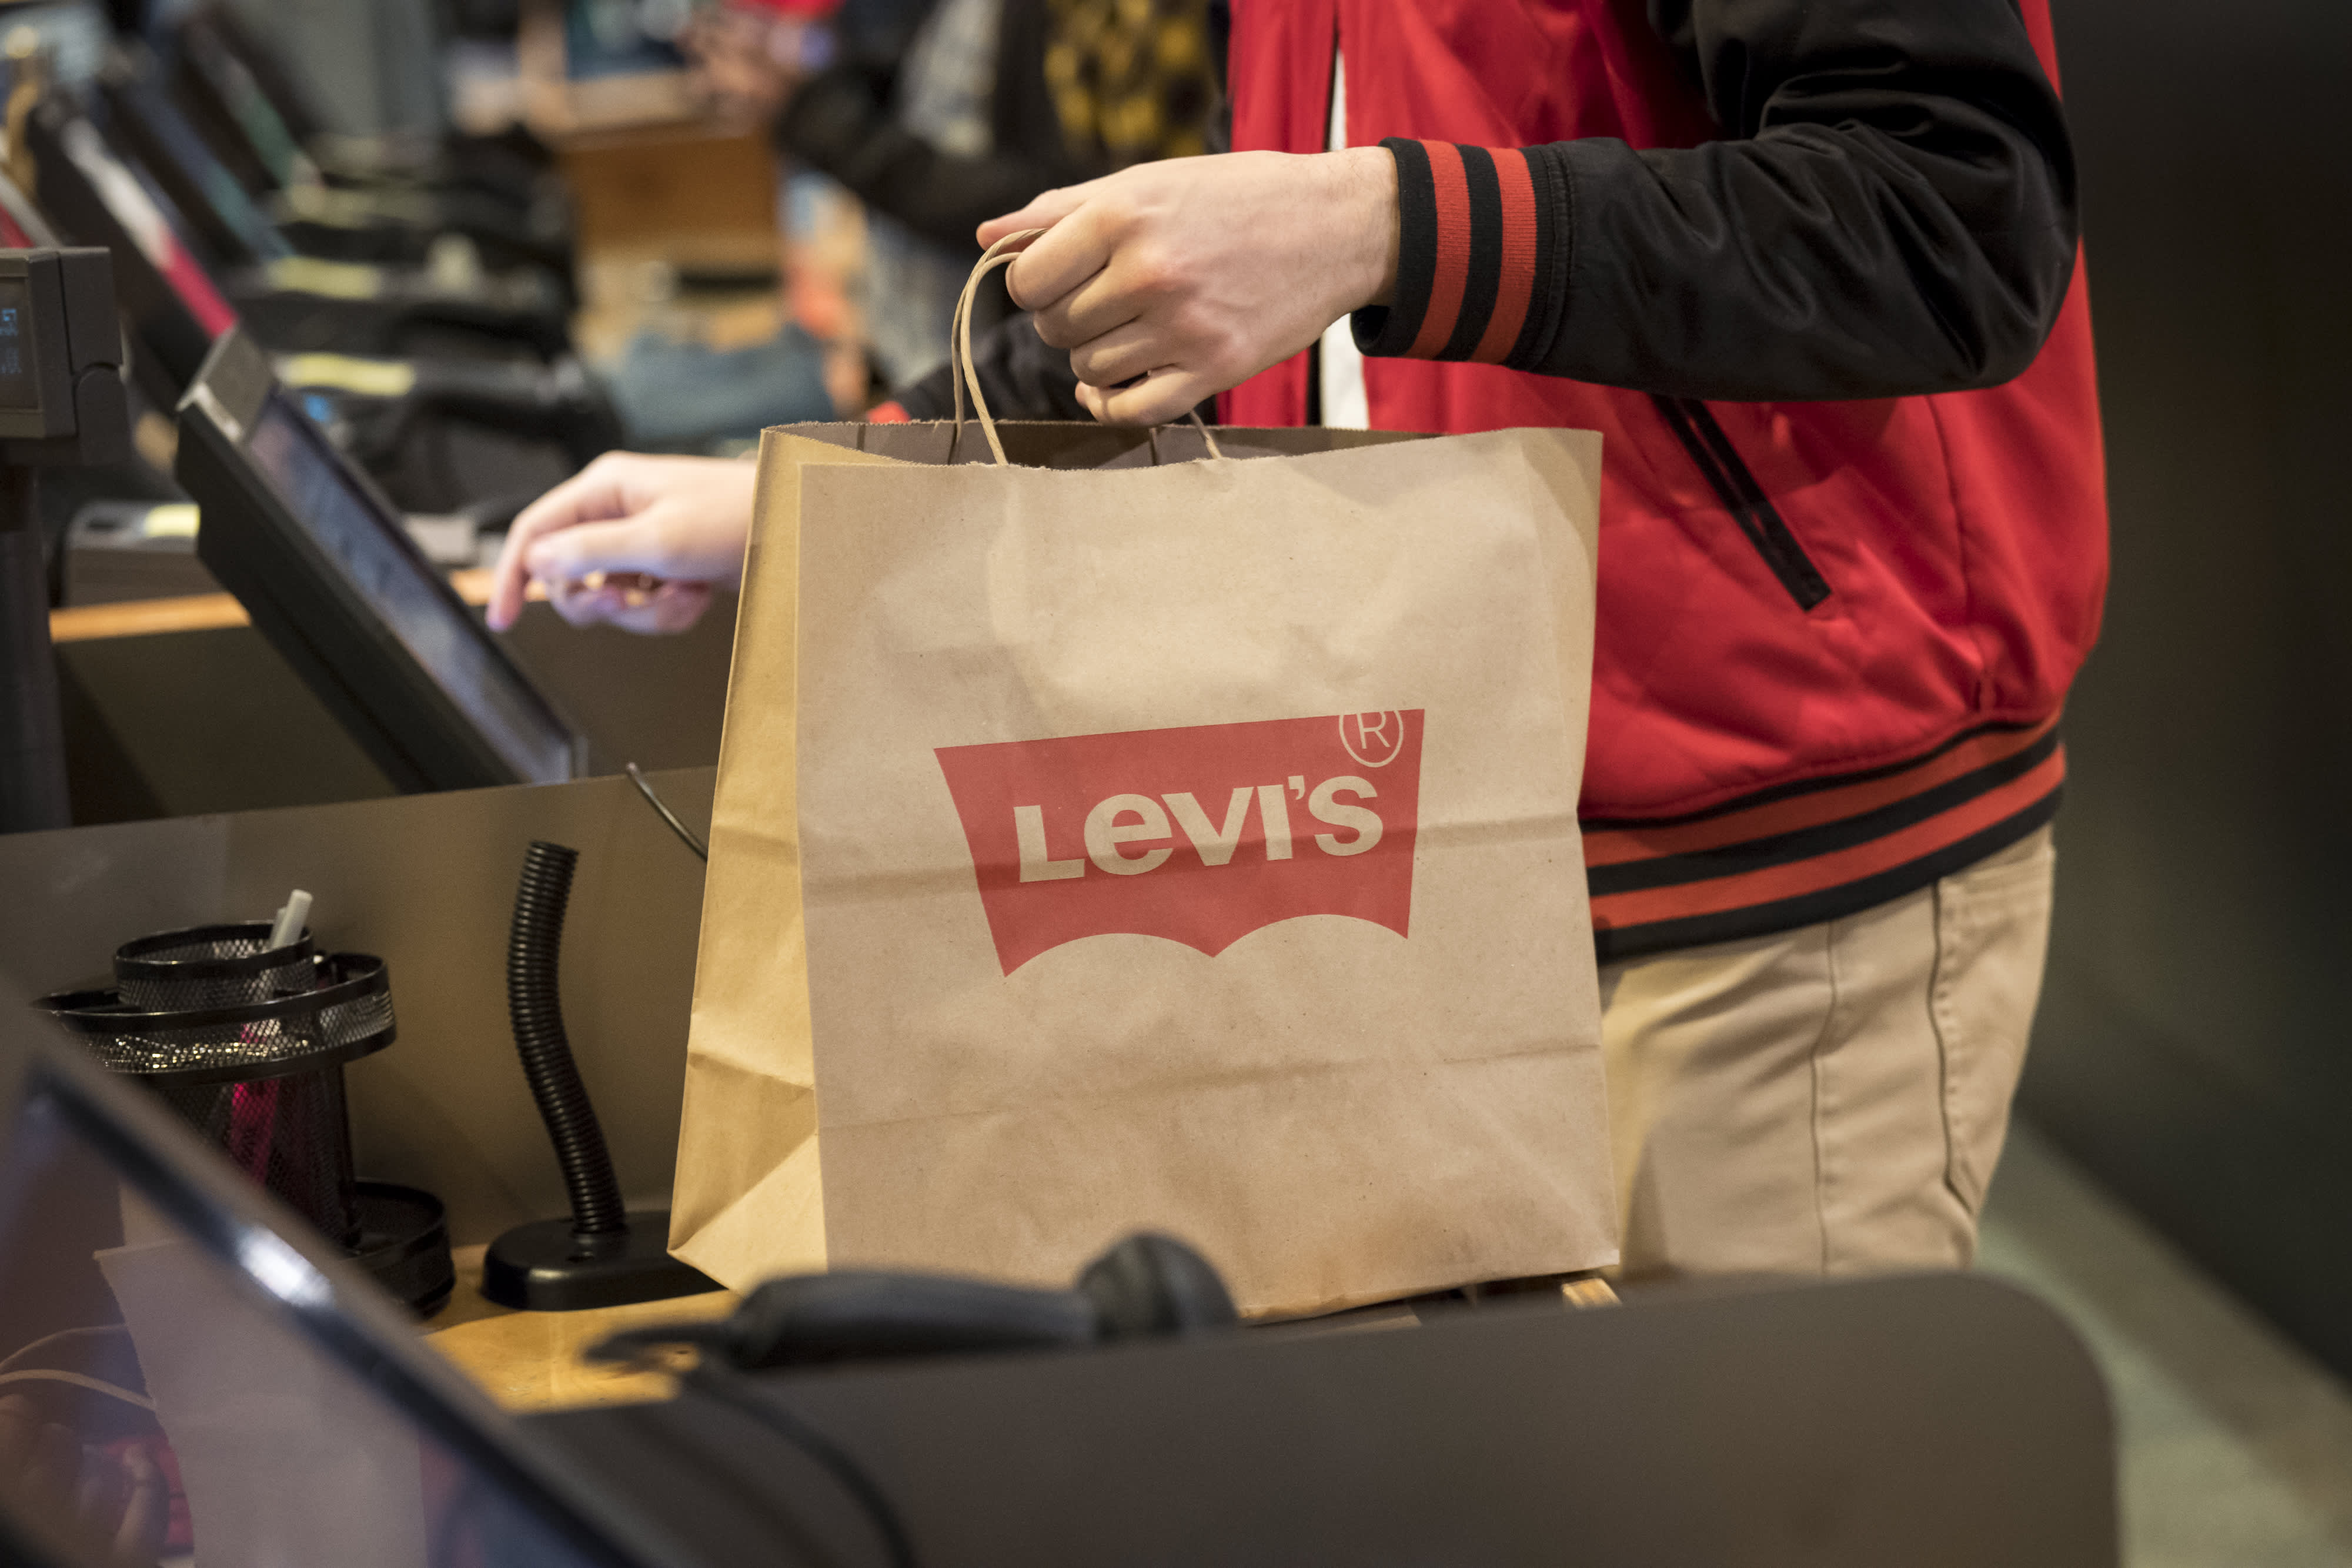 Levi’s (LEVI) reports earnings in the first quarter of 2021